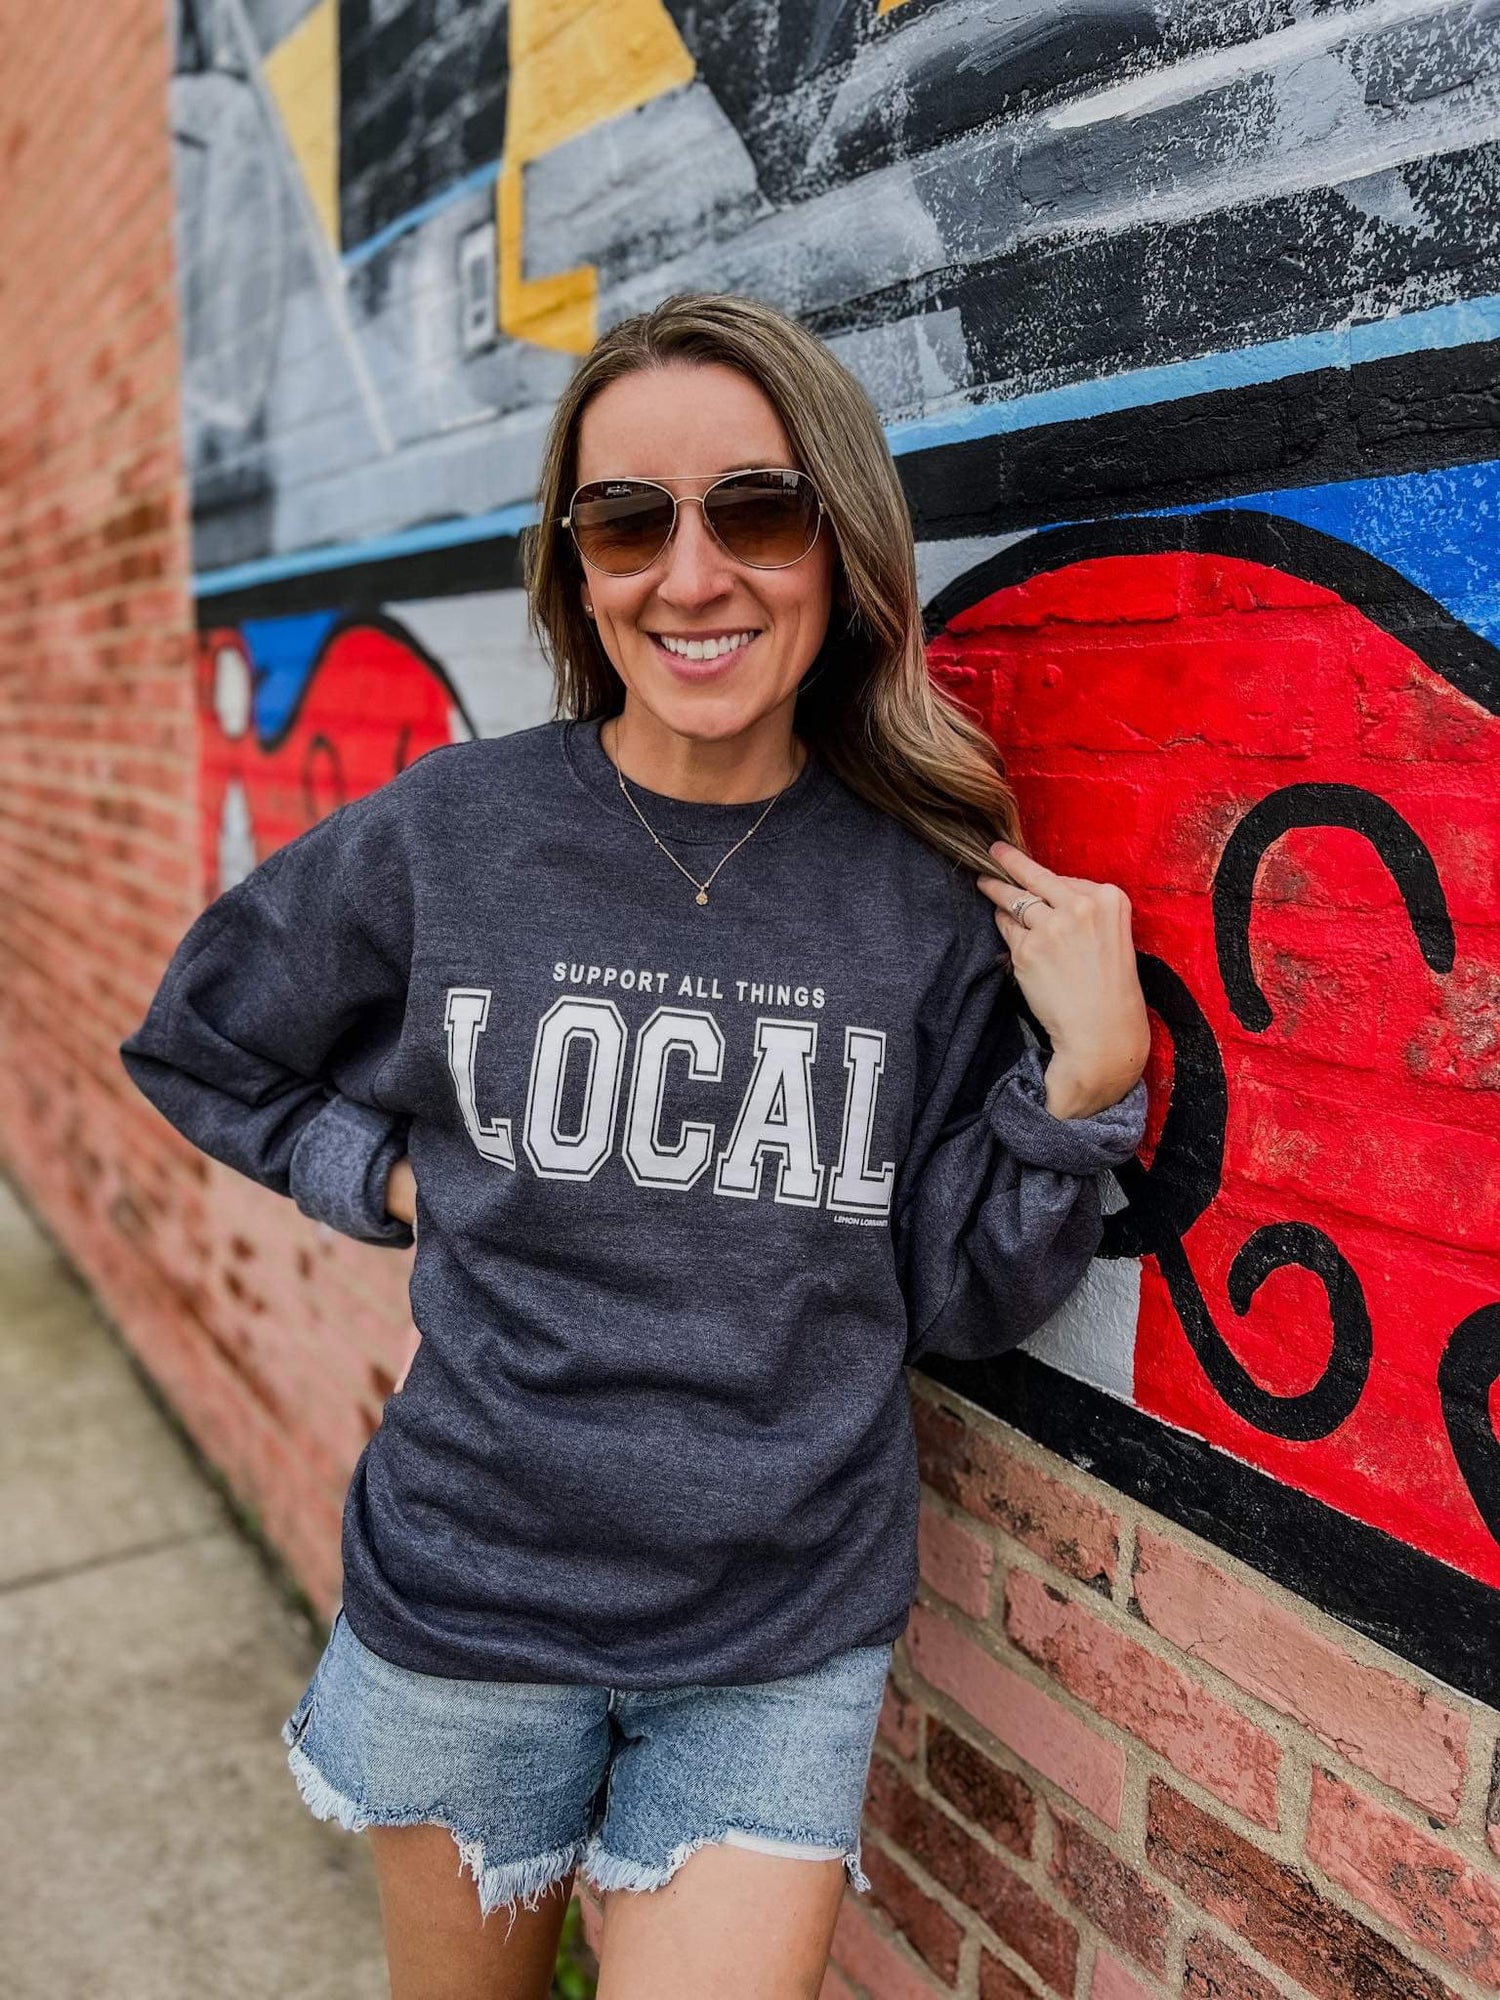 SUPPORT ALL THINGS LOCAL - Crewneck Sweatshirt